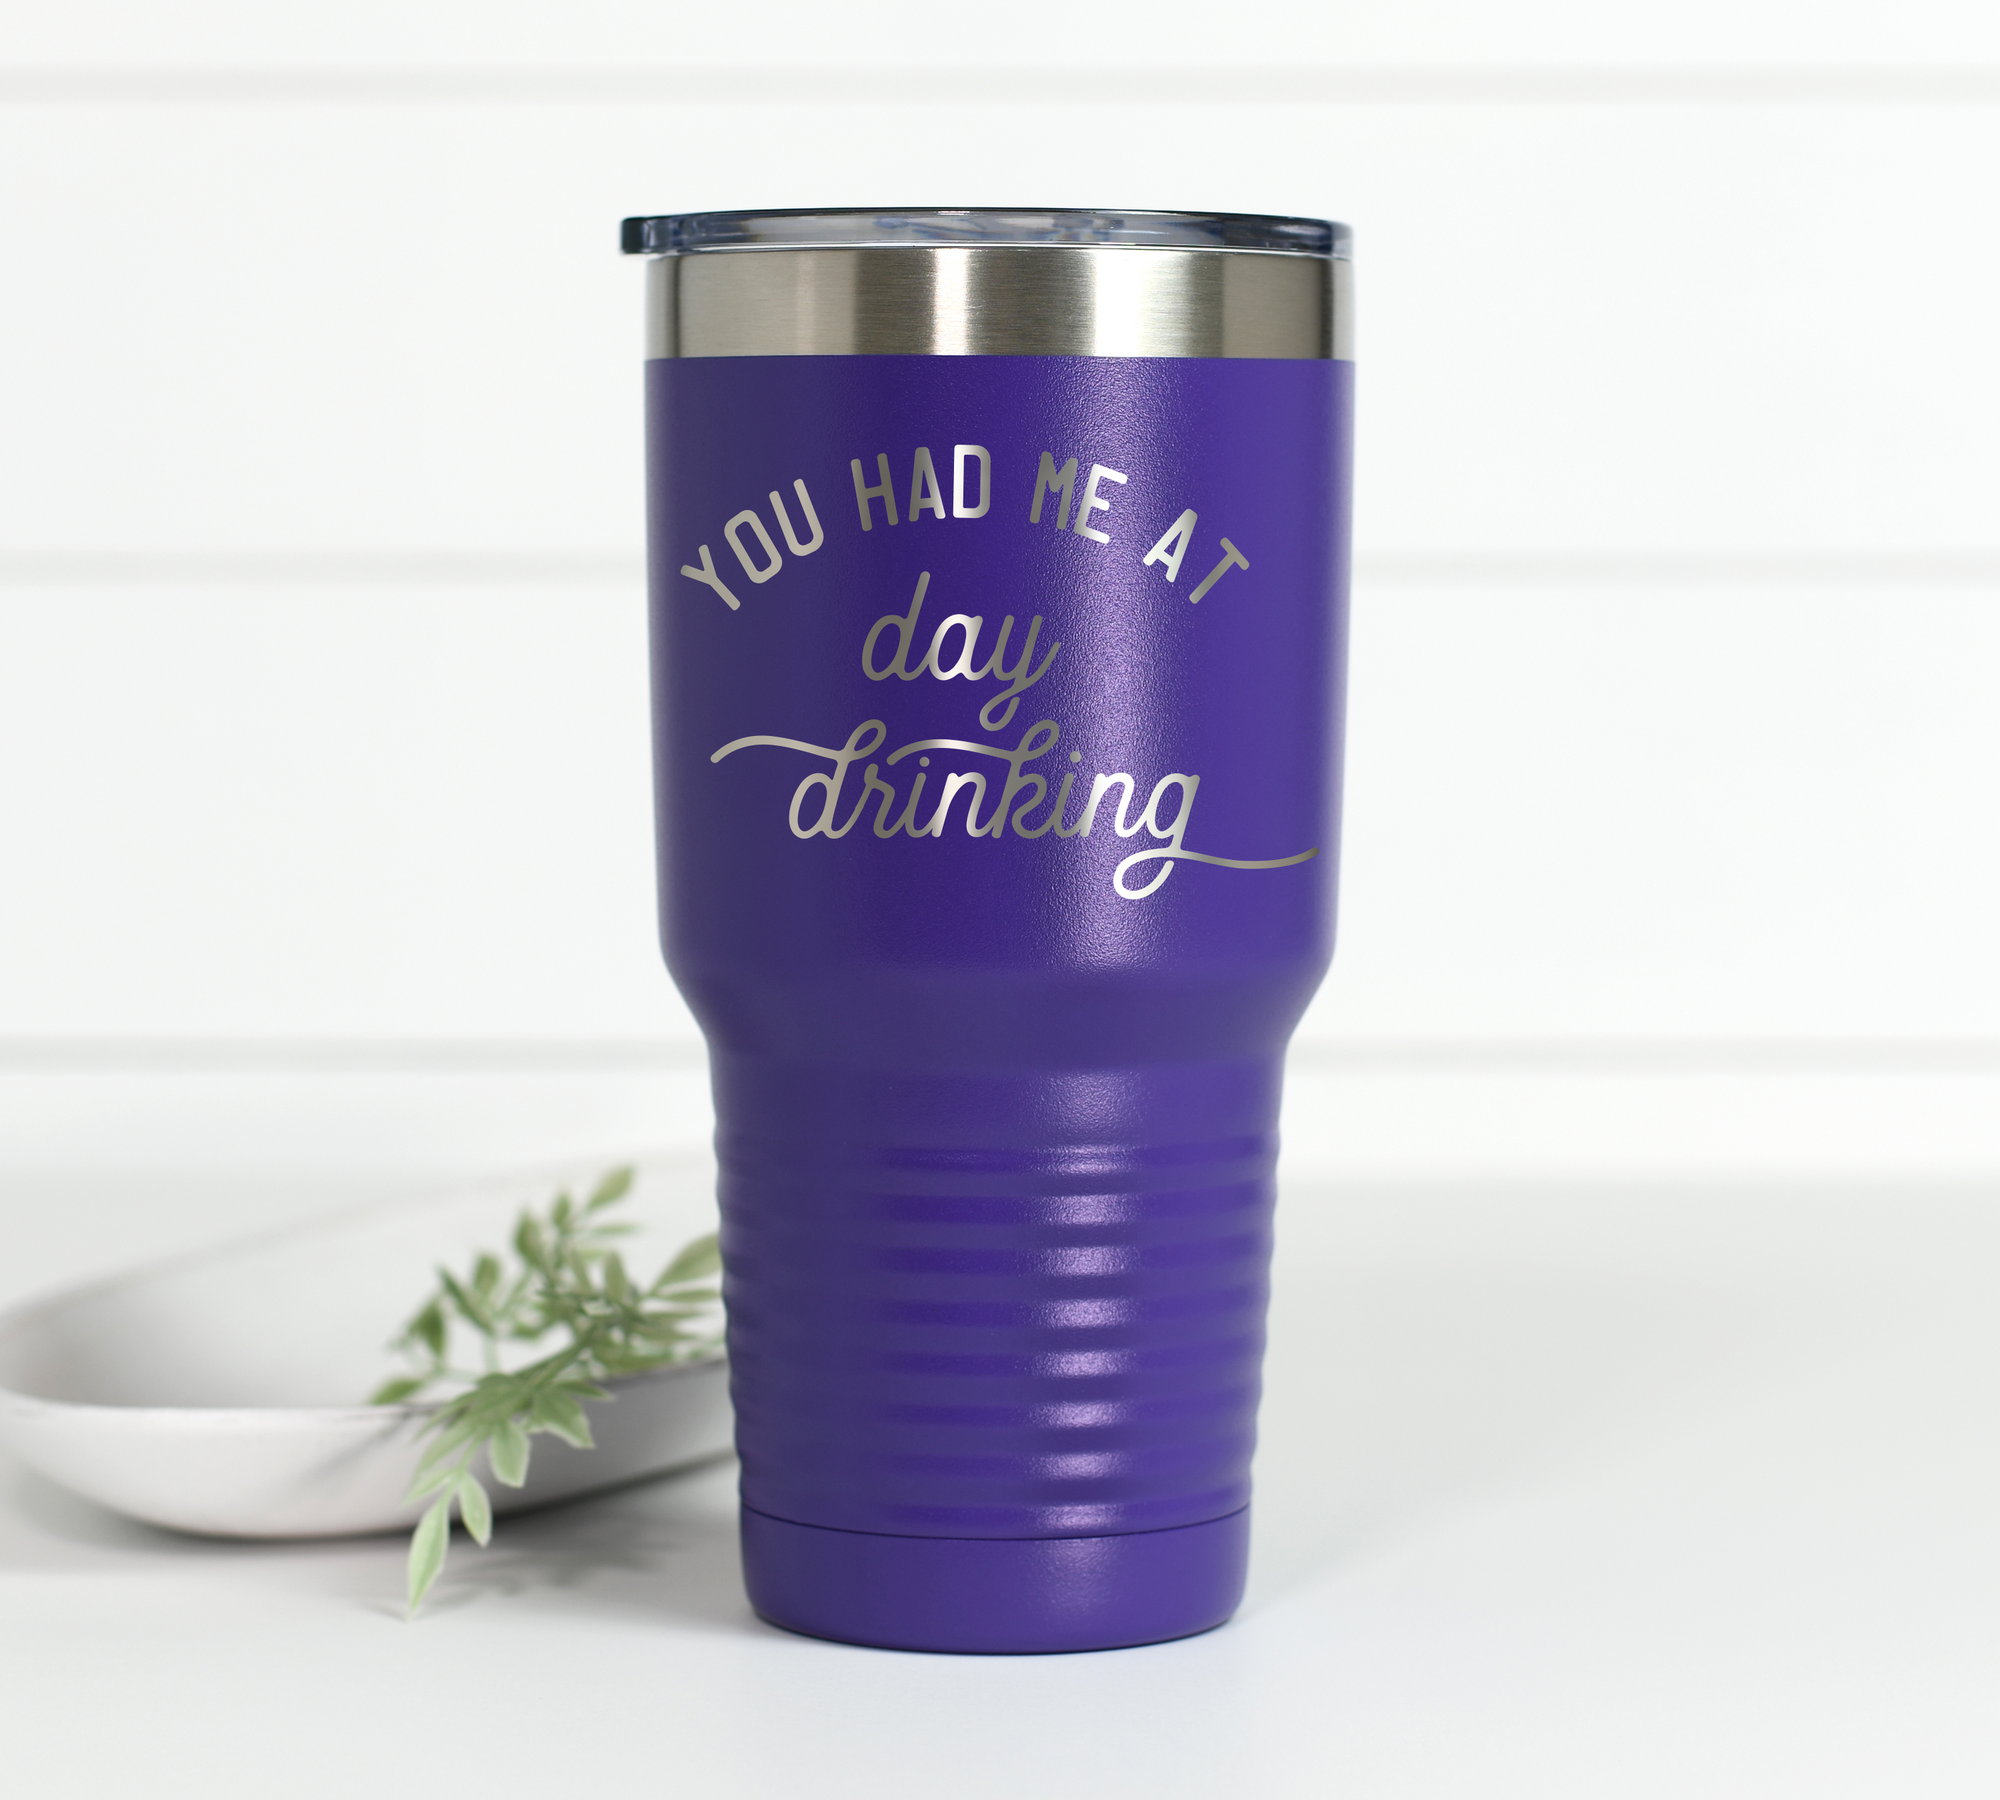 You Had Me At Day Drinking 30 oz Engraved Tumbler